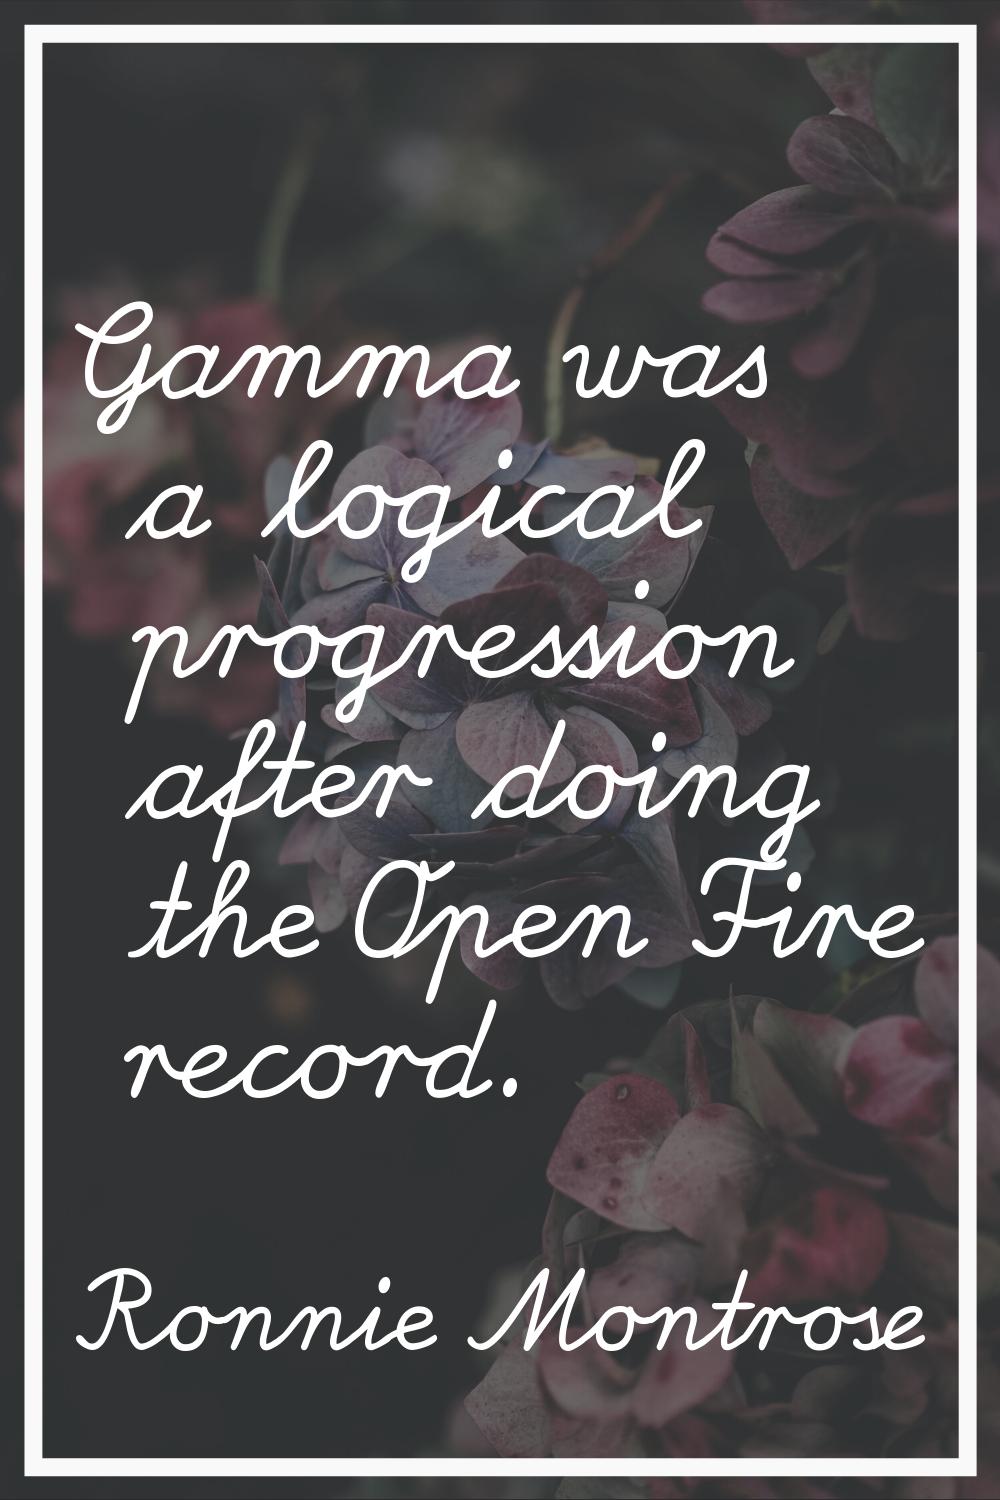 Gamma was a logical progression after doing the Open Fire record.